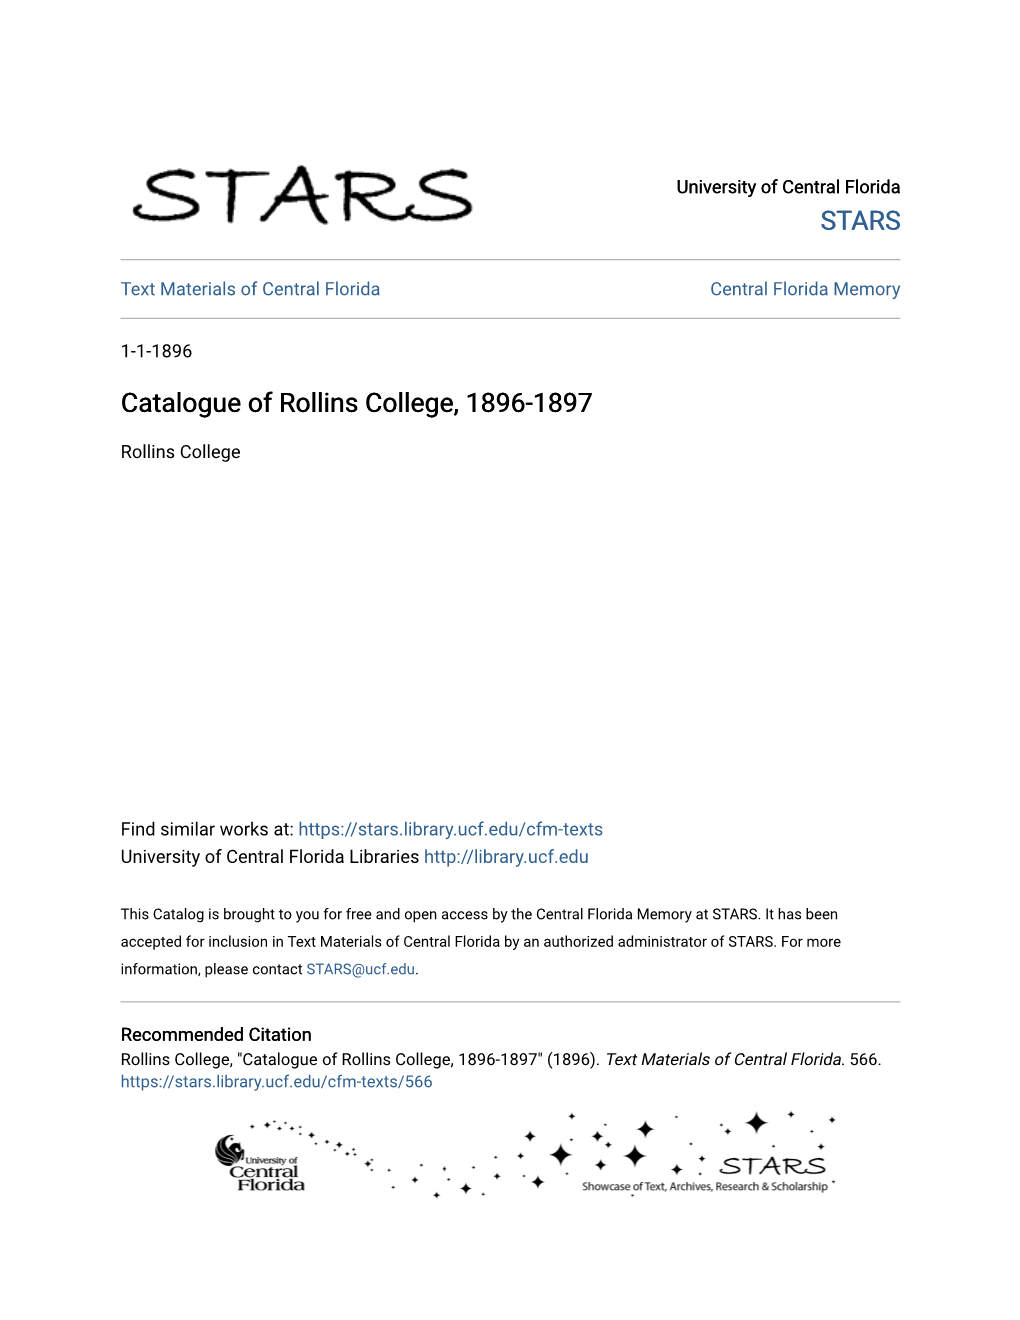 Catalogue of Rollins College, 1896-1897